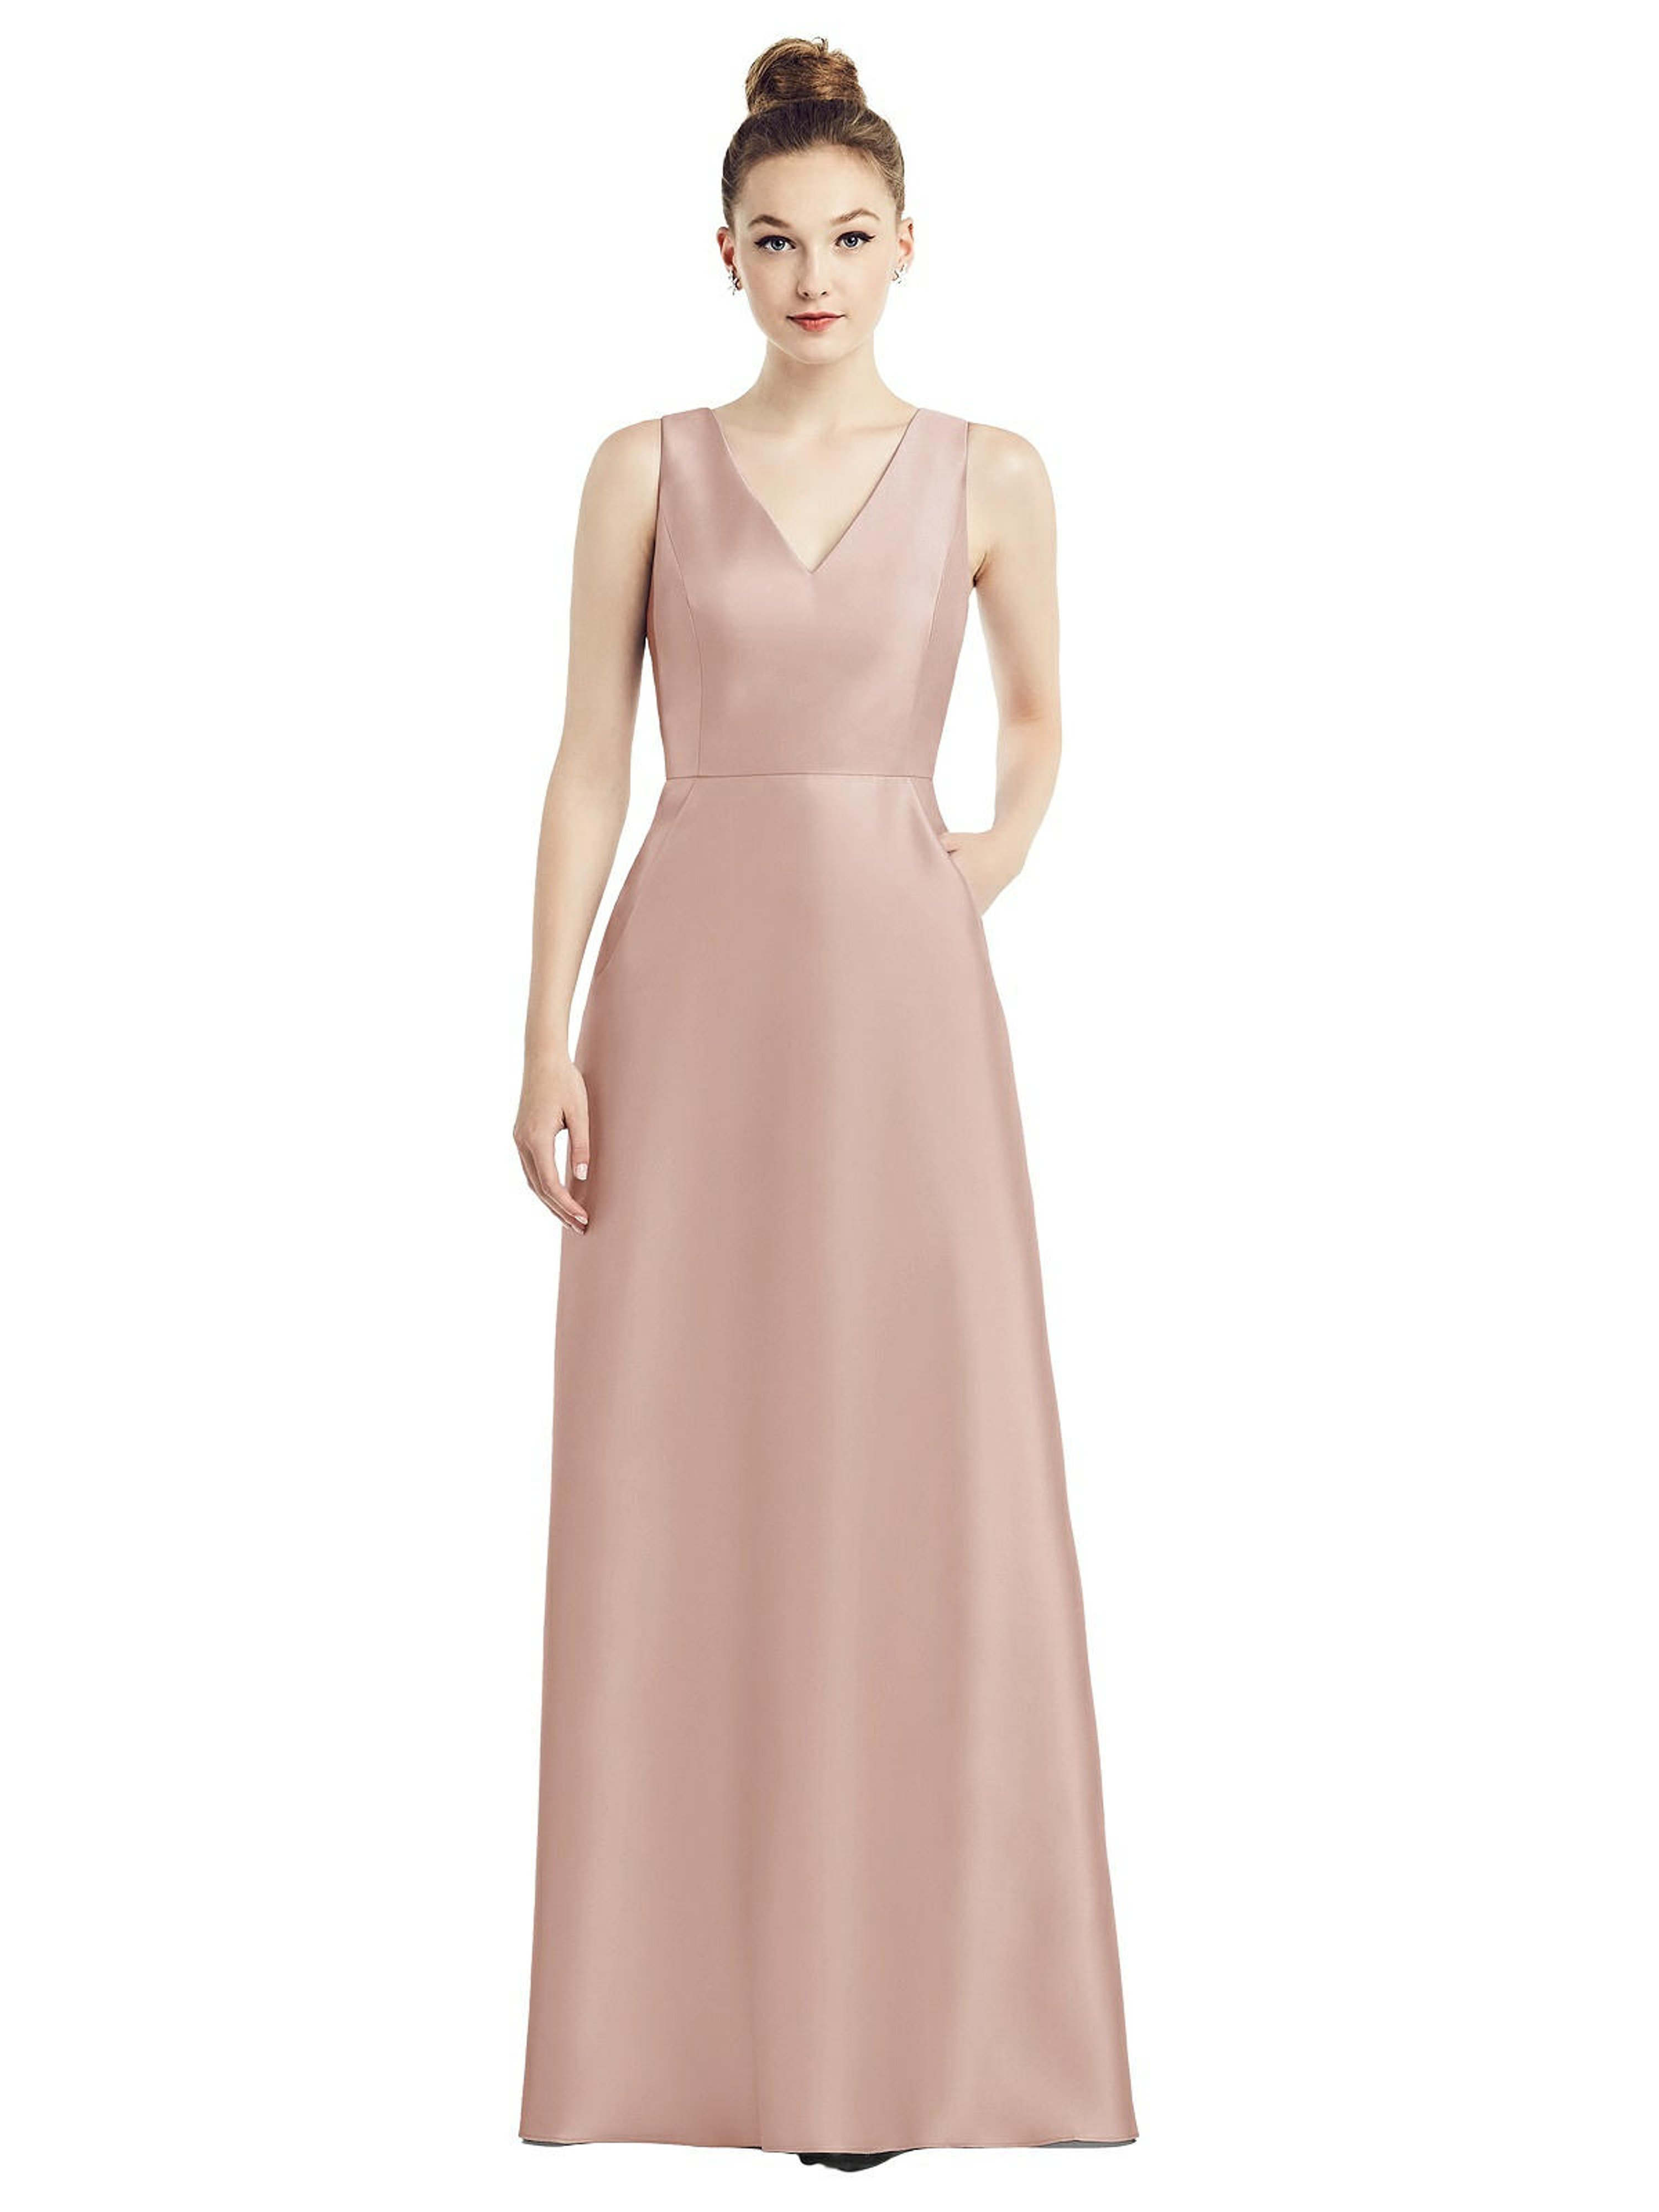 ALFRED SUNG ALFRED SUNG SLEEVELESS V-NECK SATIN DRESS WITH POCKETS